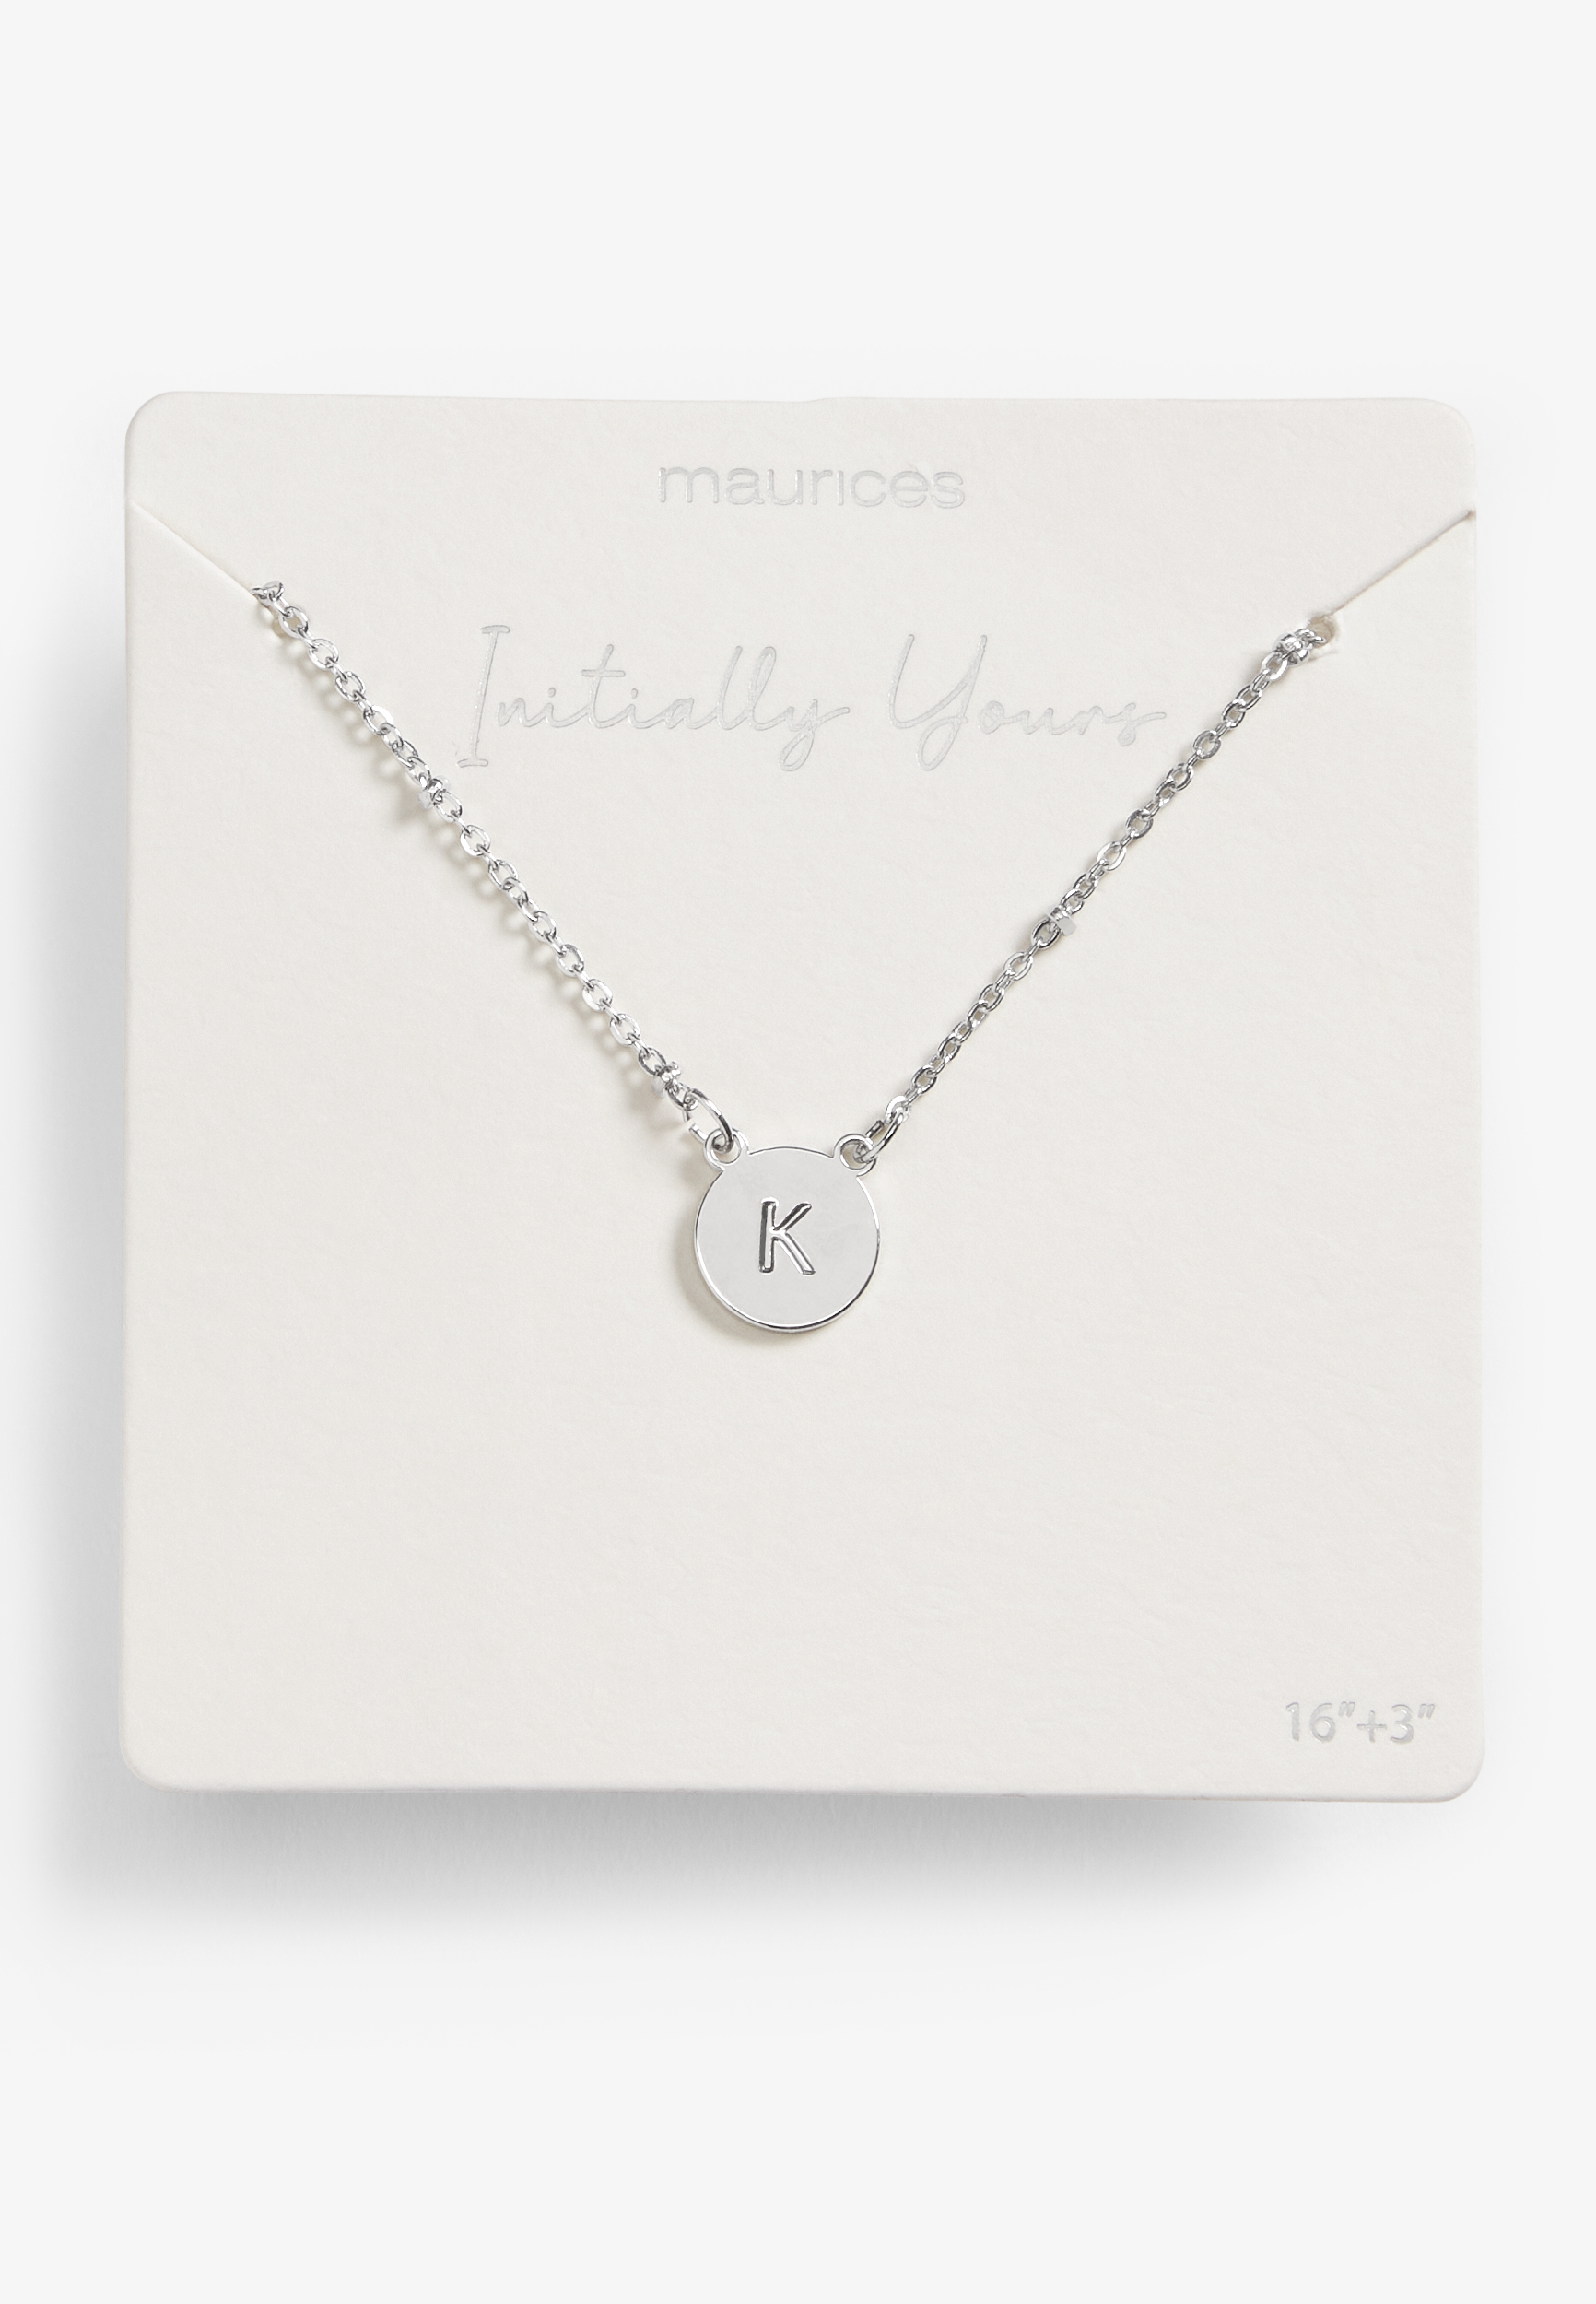 Silver Initial K Necklace | maurices